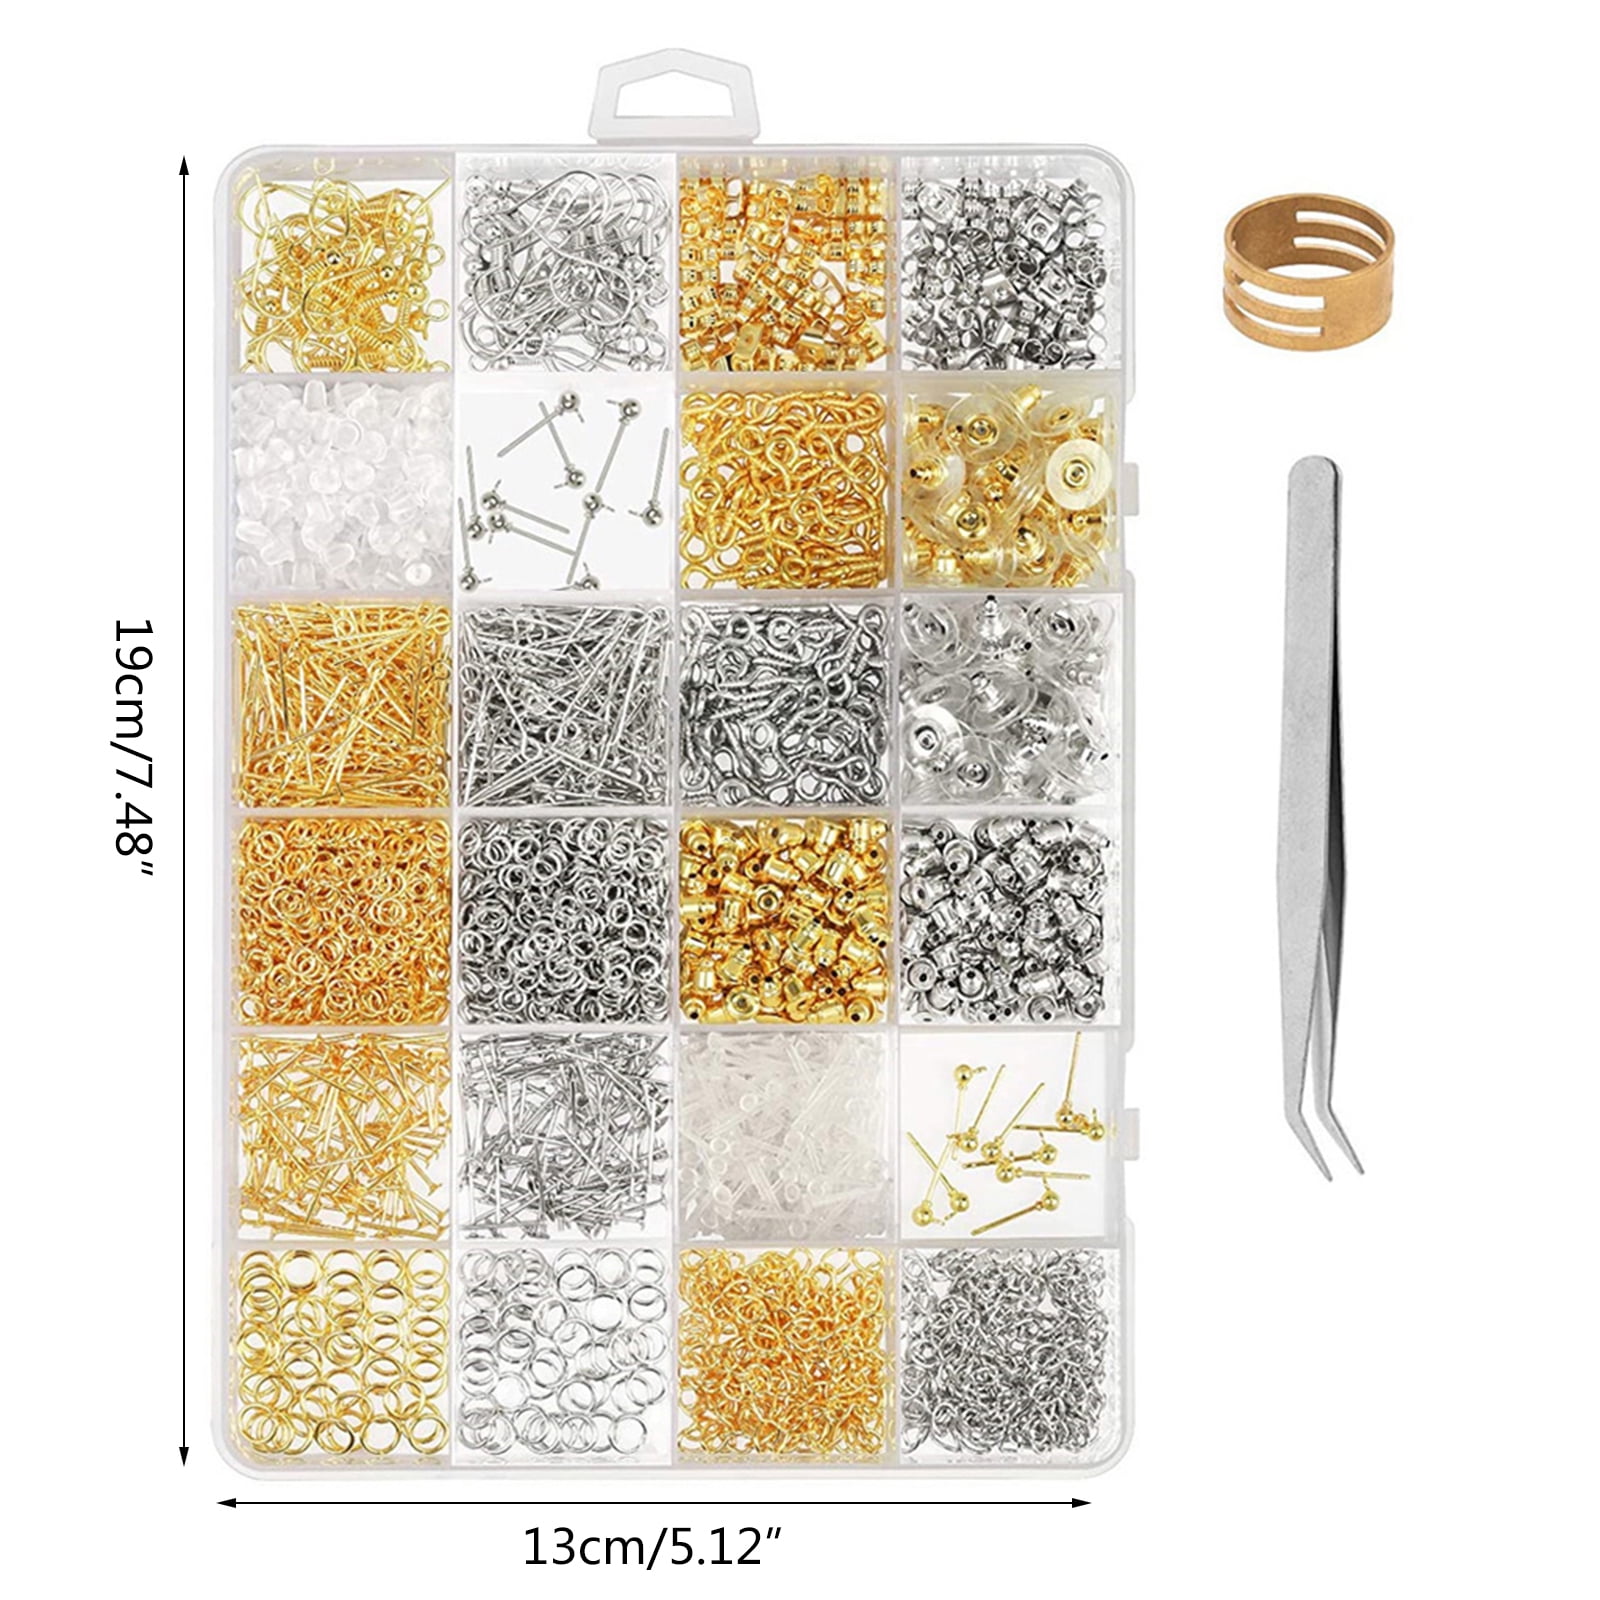 TOSEERY Earring Making Kit, 2450Pcs Earring Making Supplies Kit with Earring Hooks, Earring Posts and Backs, Jump Rings for Jewelry Making, Adult Unisex, Size